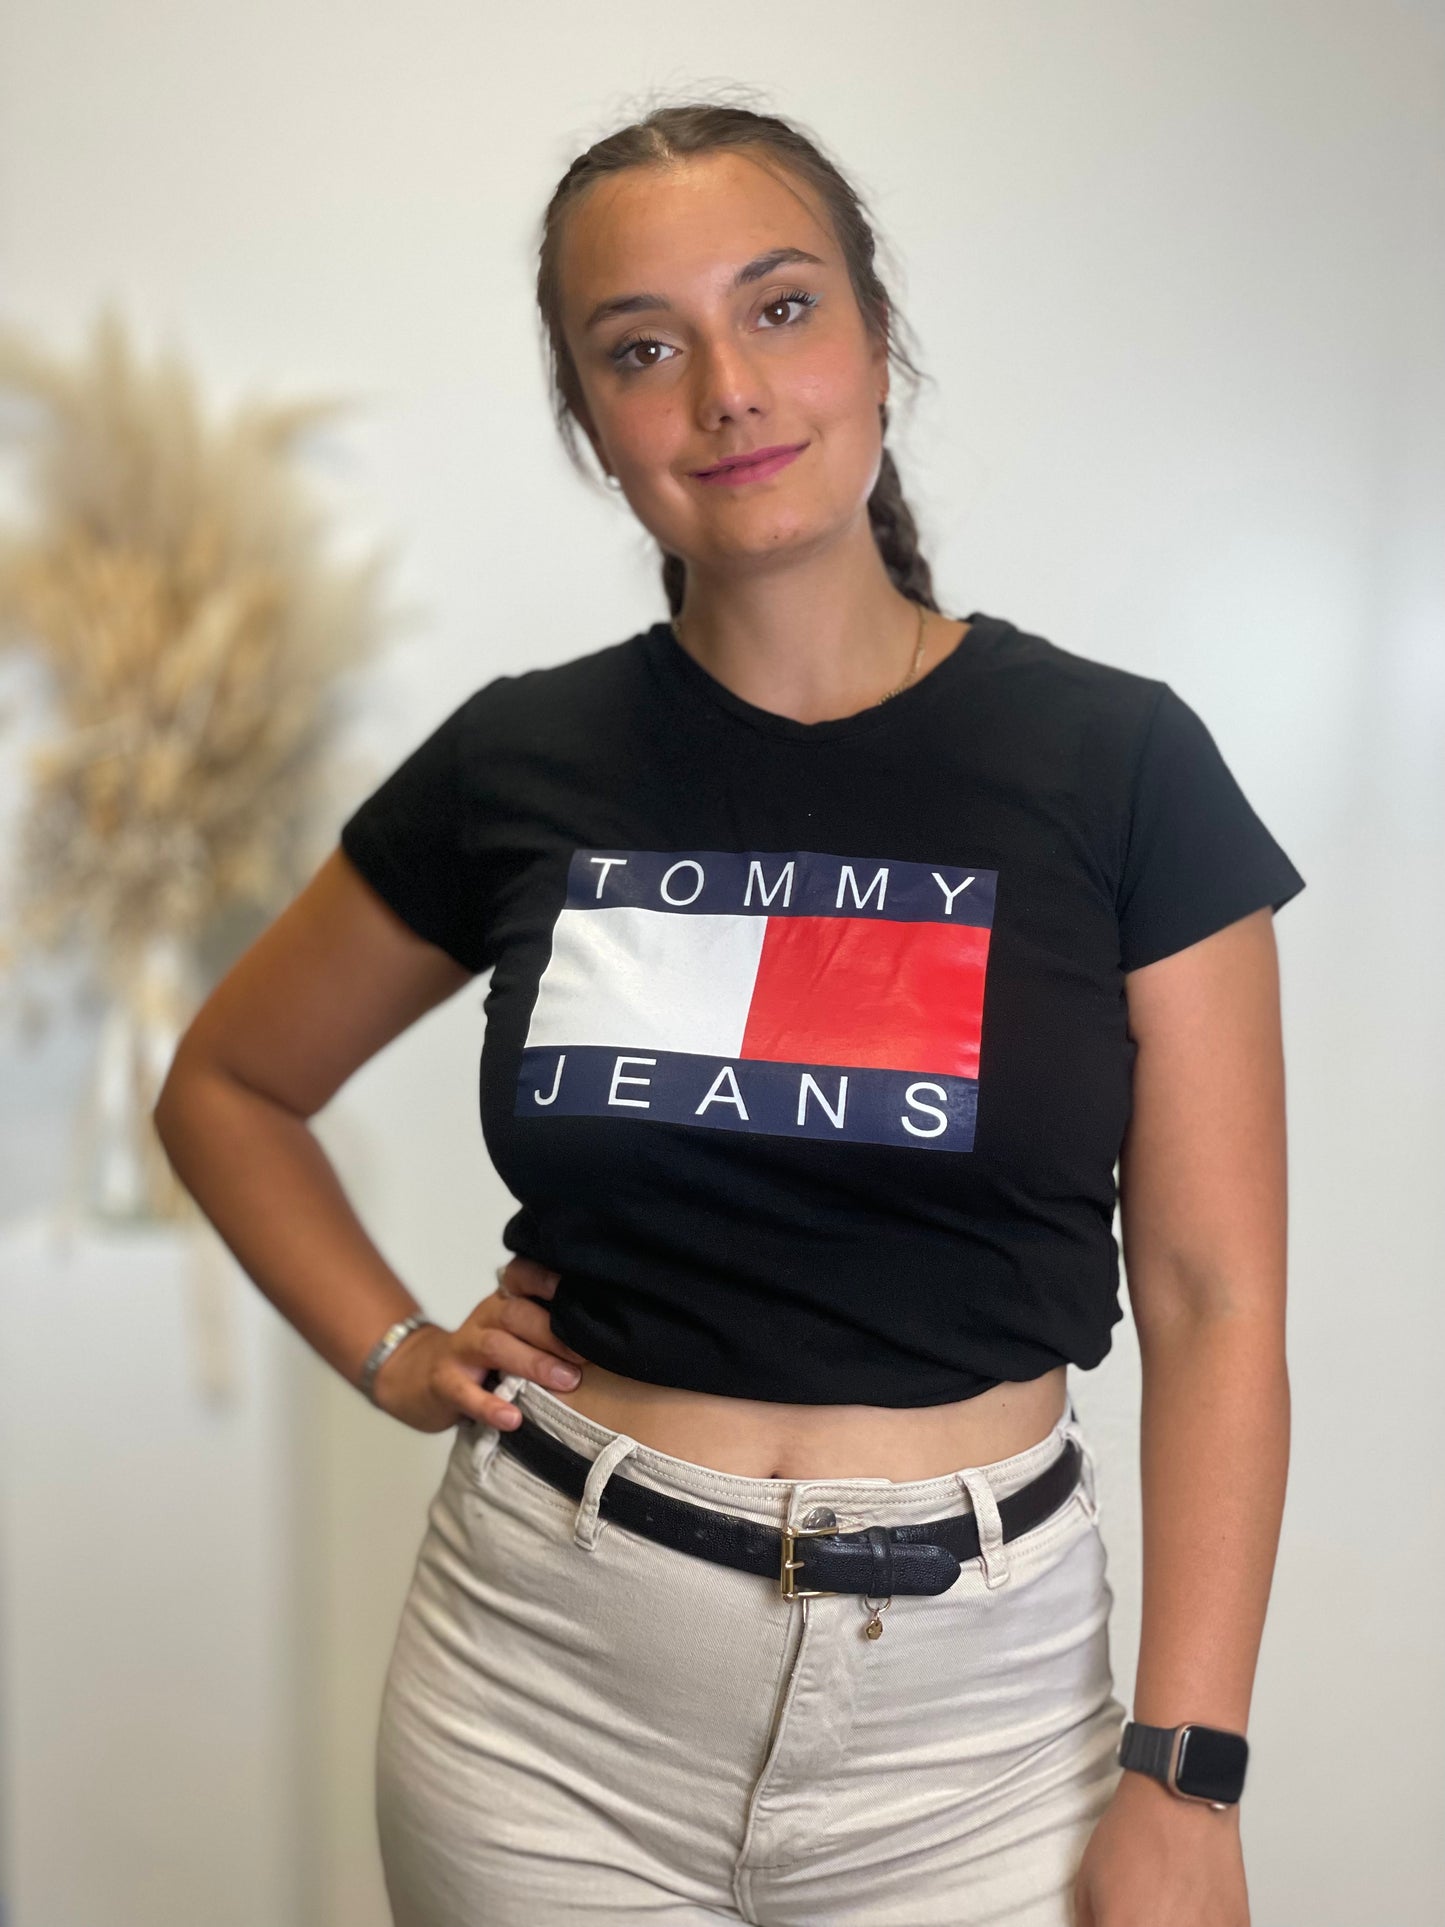 TOMMY Jeans Shirt